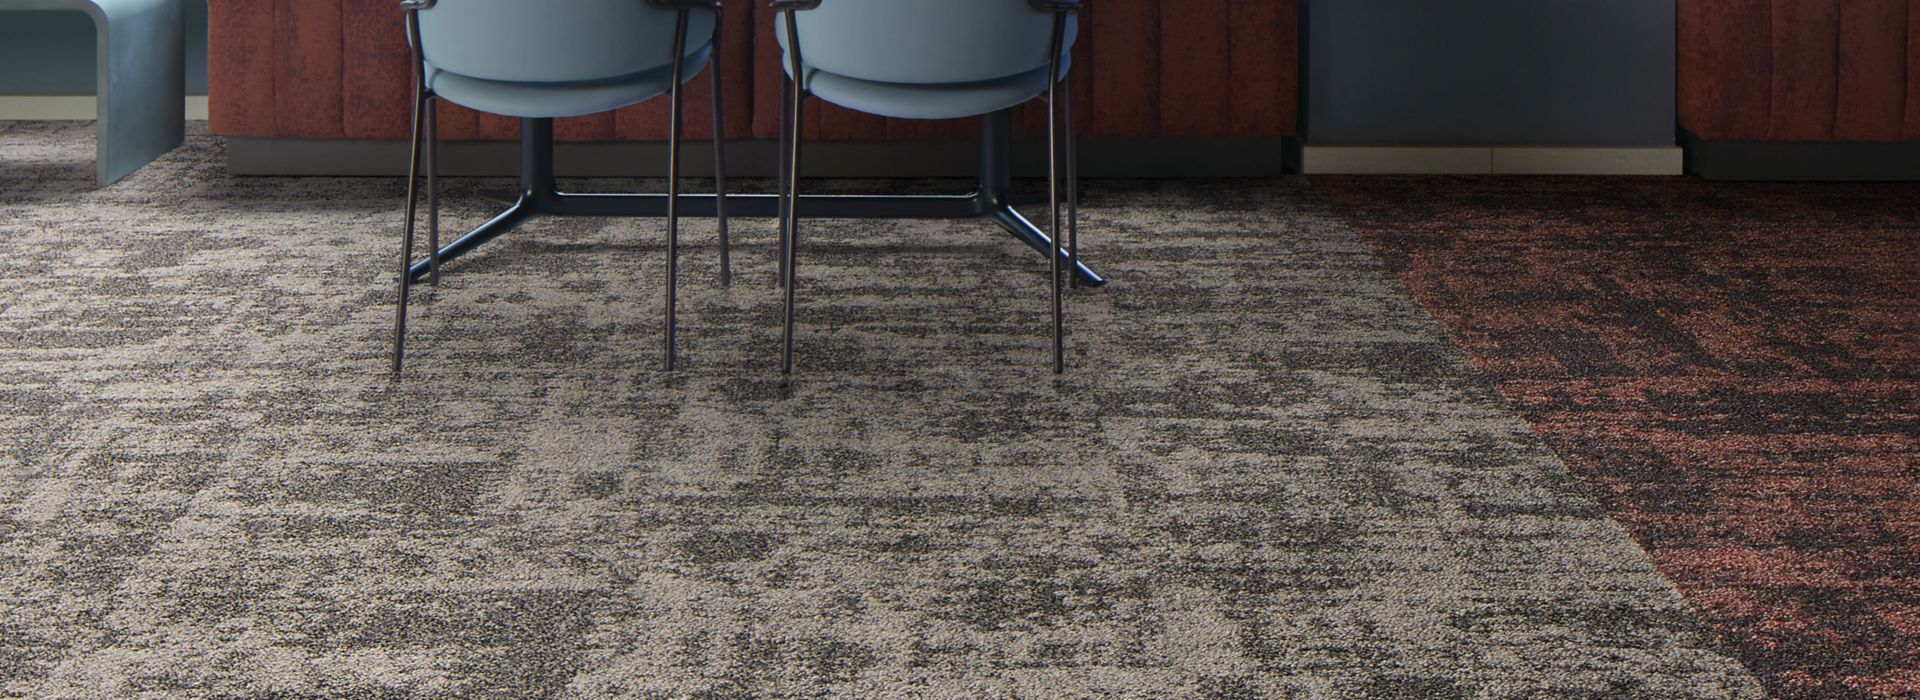 Interface Stunt Double carpet tile in dining area with table and chairs numéro d’image 1